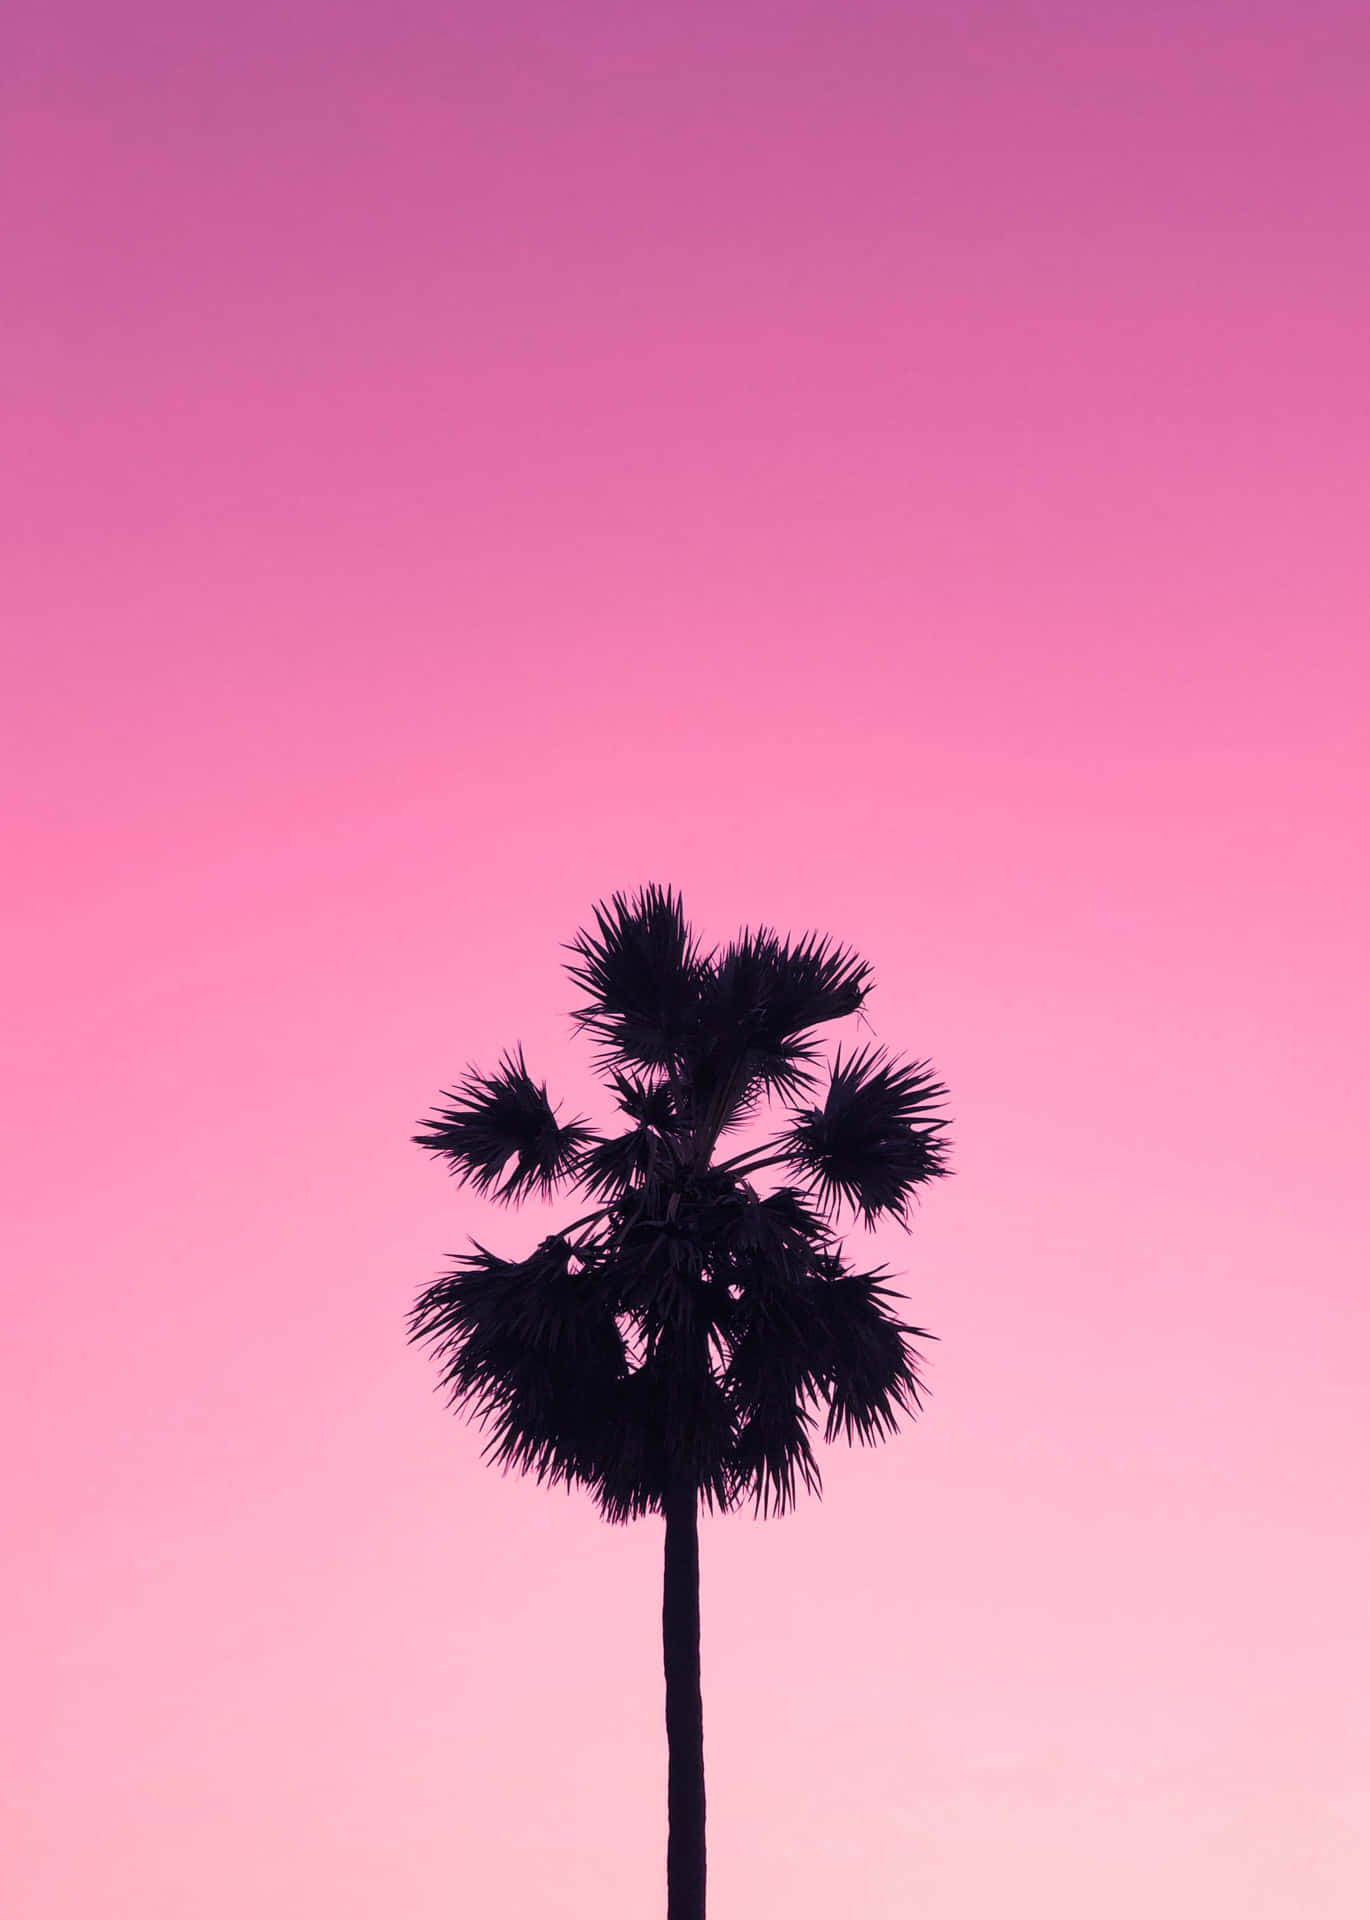 Palm Silhouette Pink Sky Wallpaper